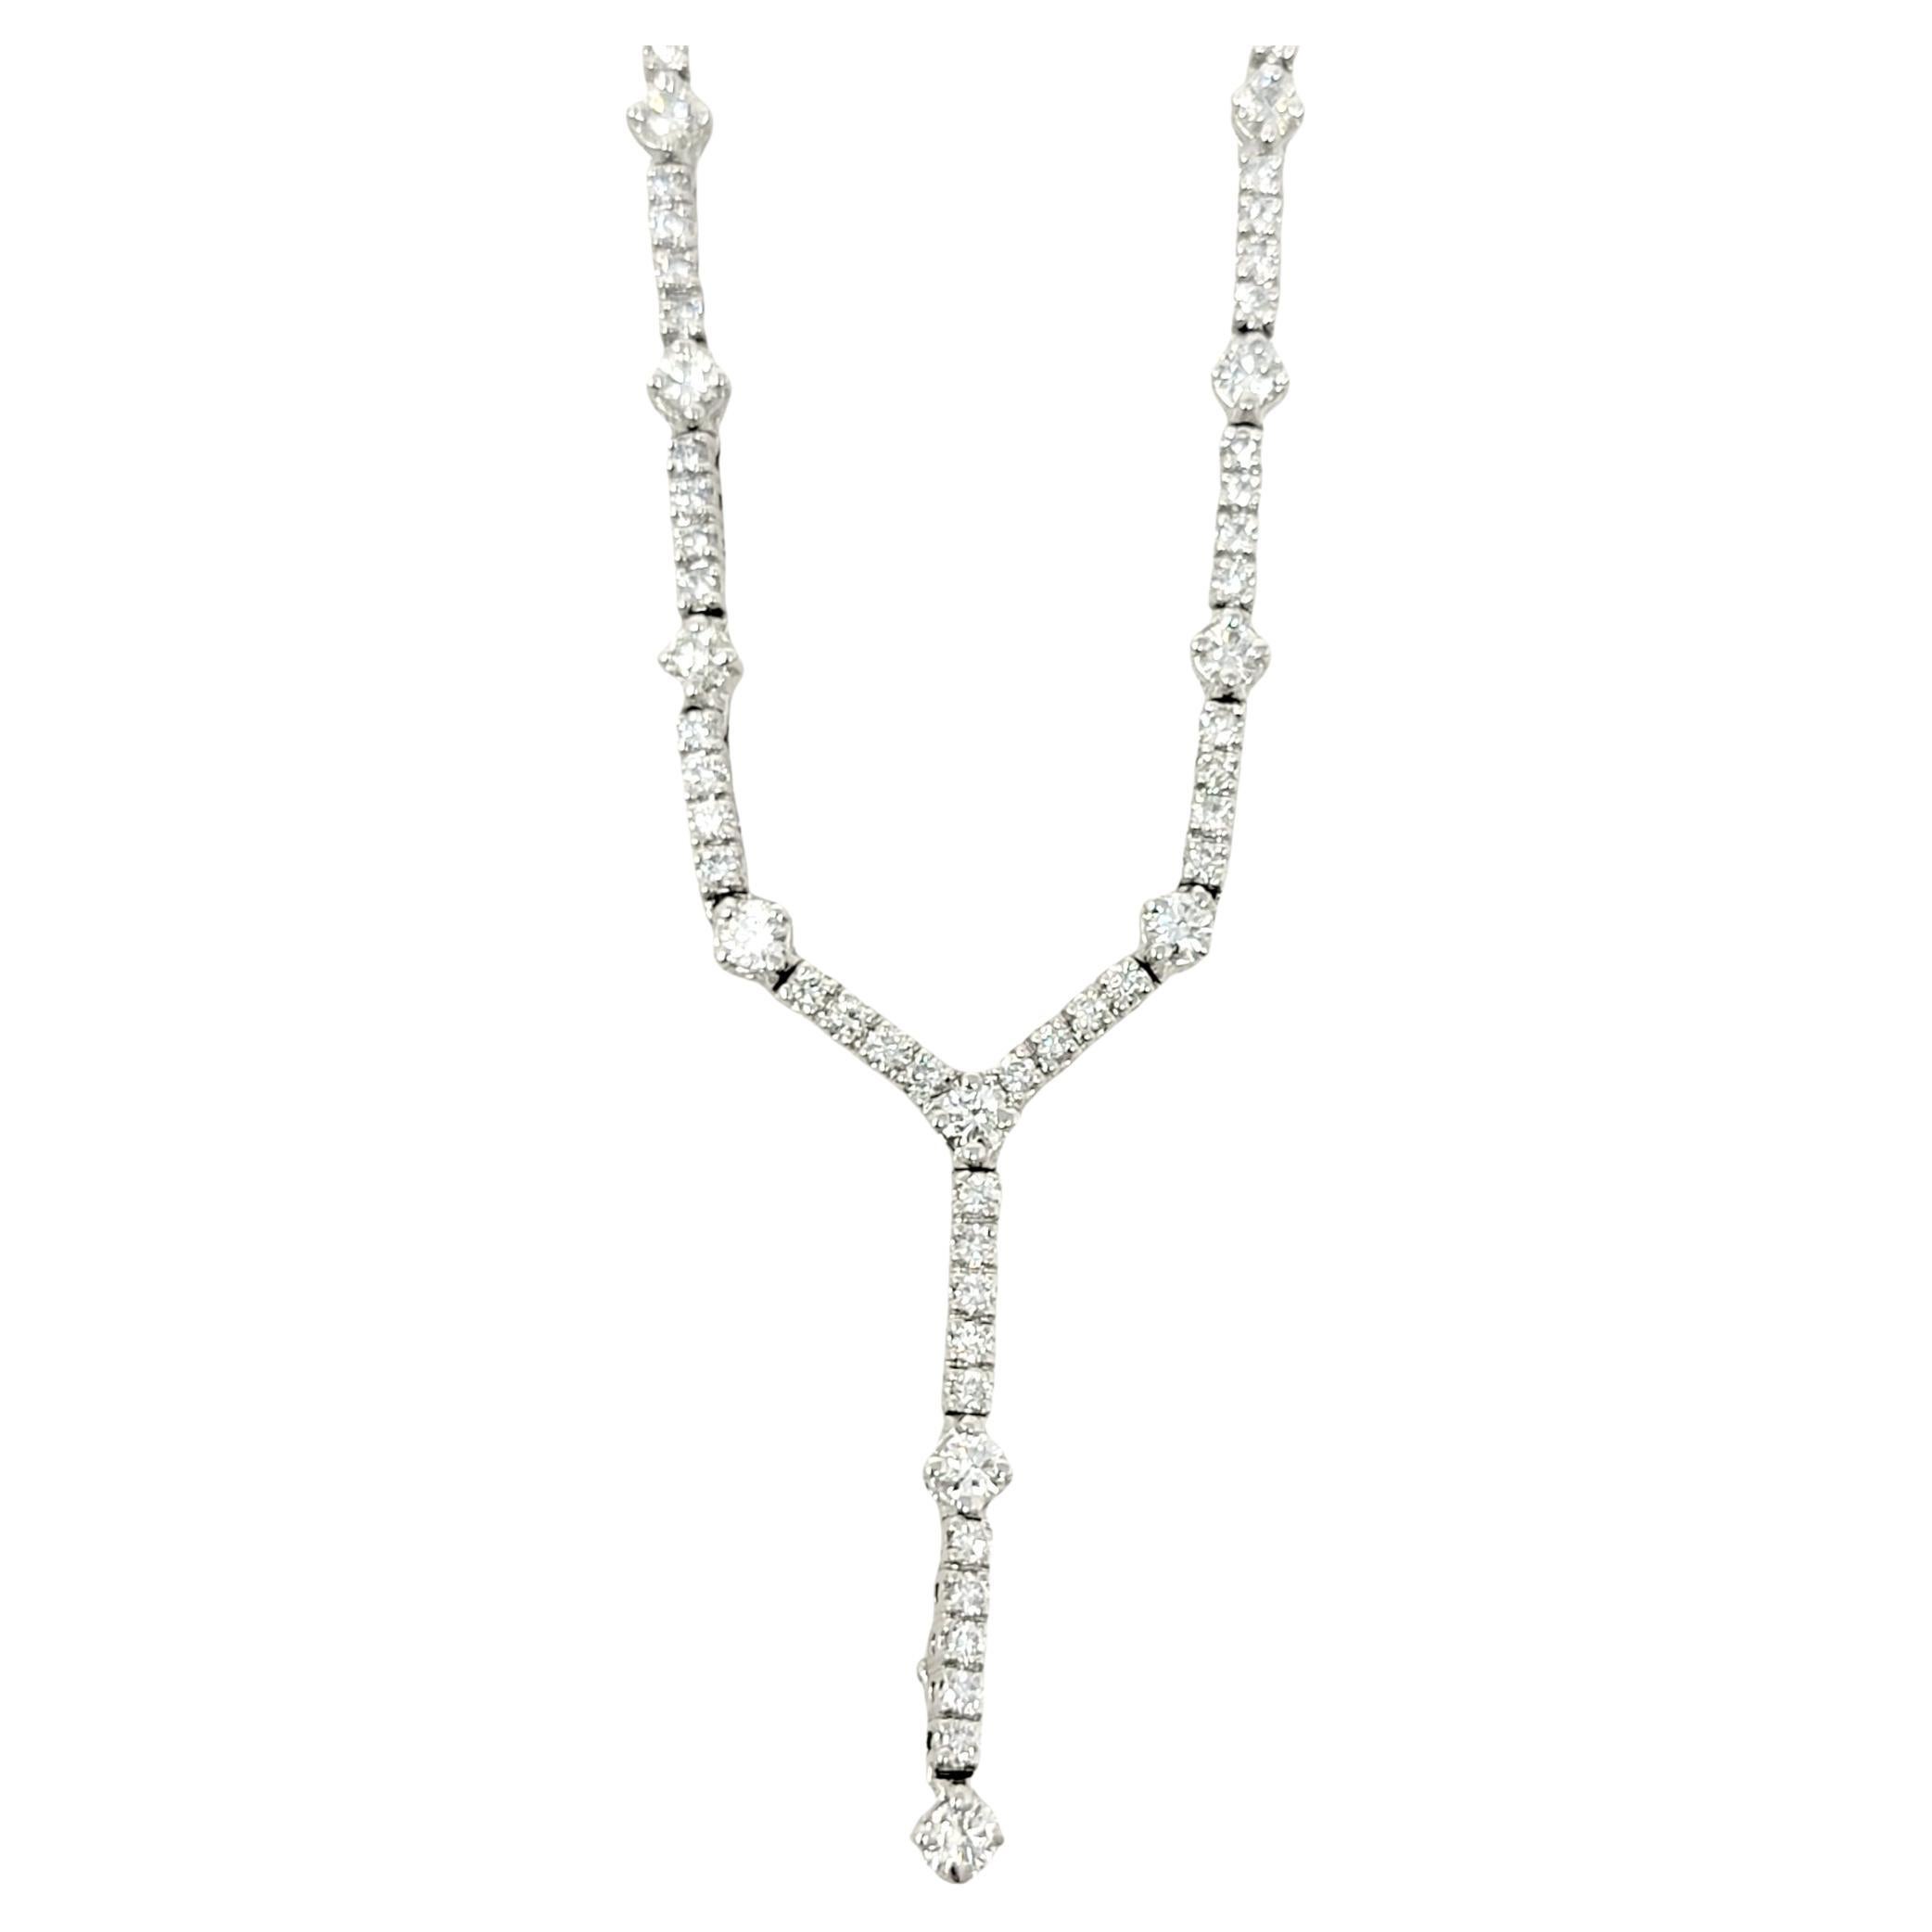 3.62 Carats Total Round Brilliant Diamond 'Y' Shaped Drop Necklace in White Gold